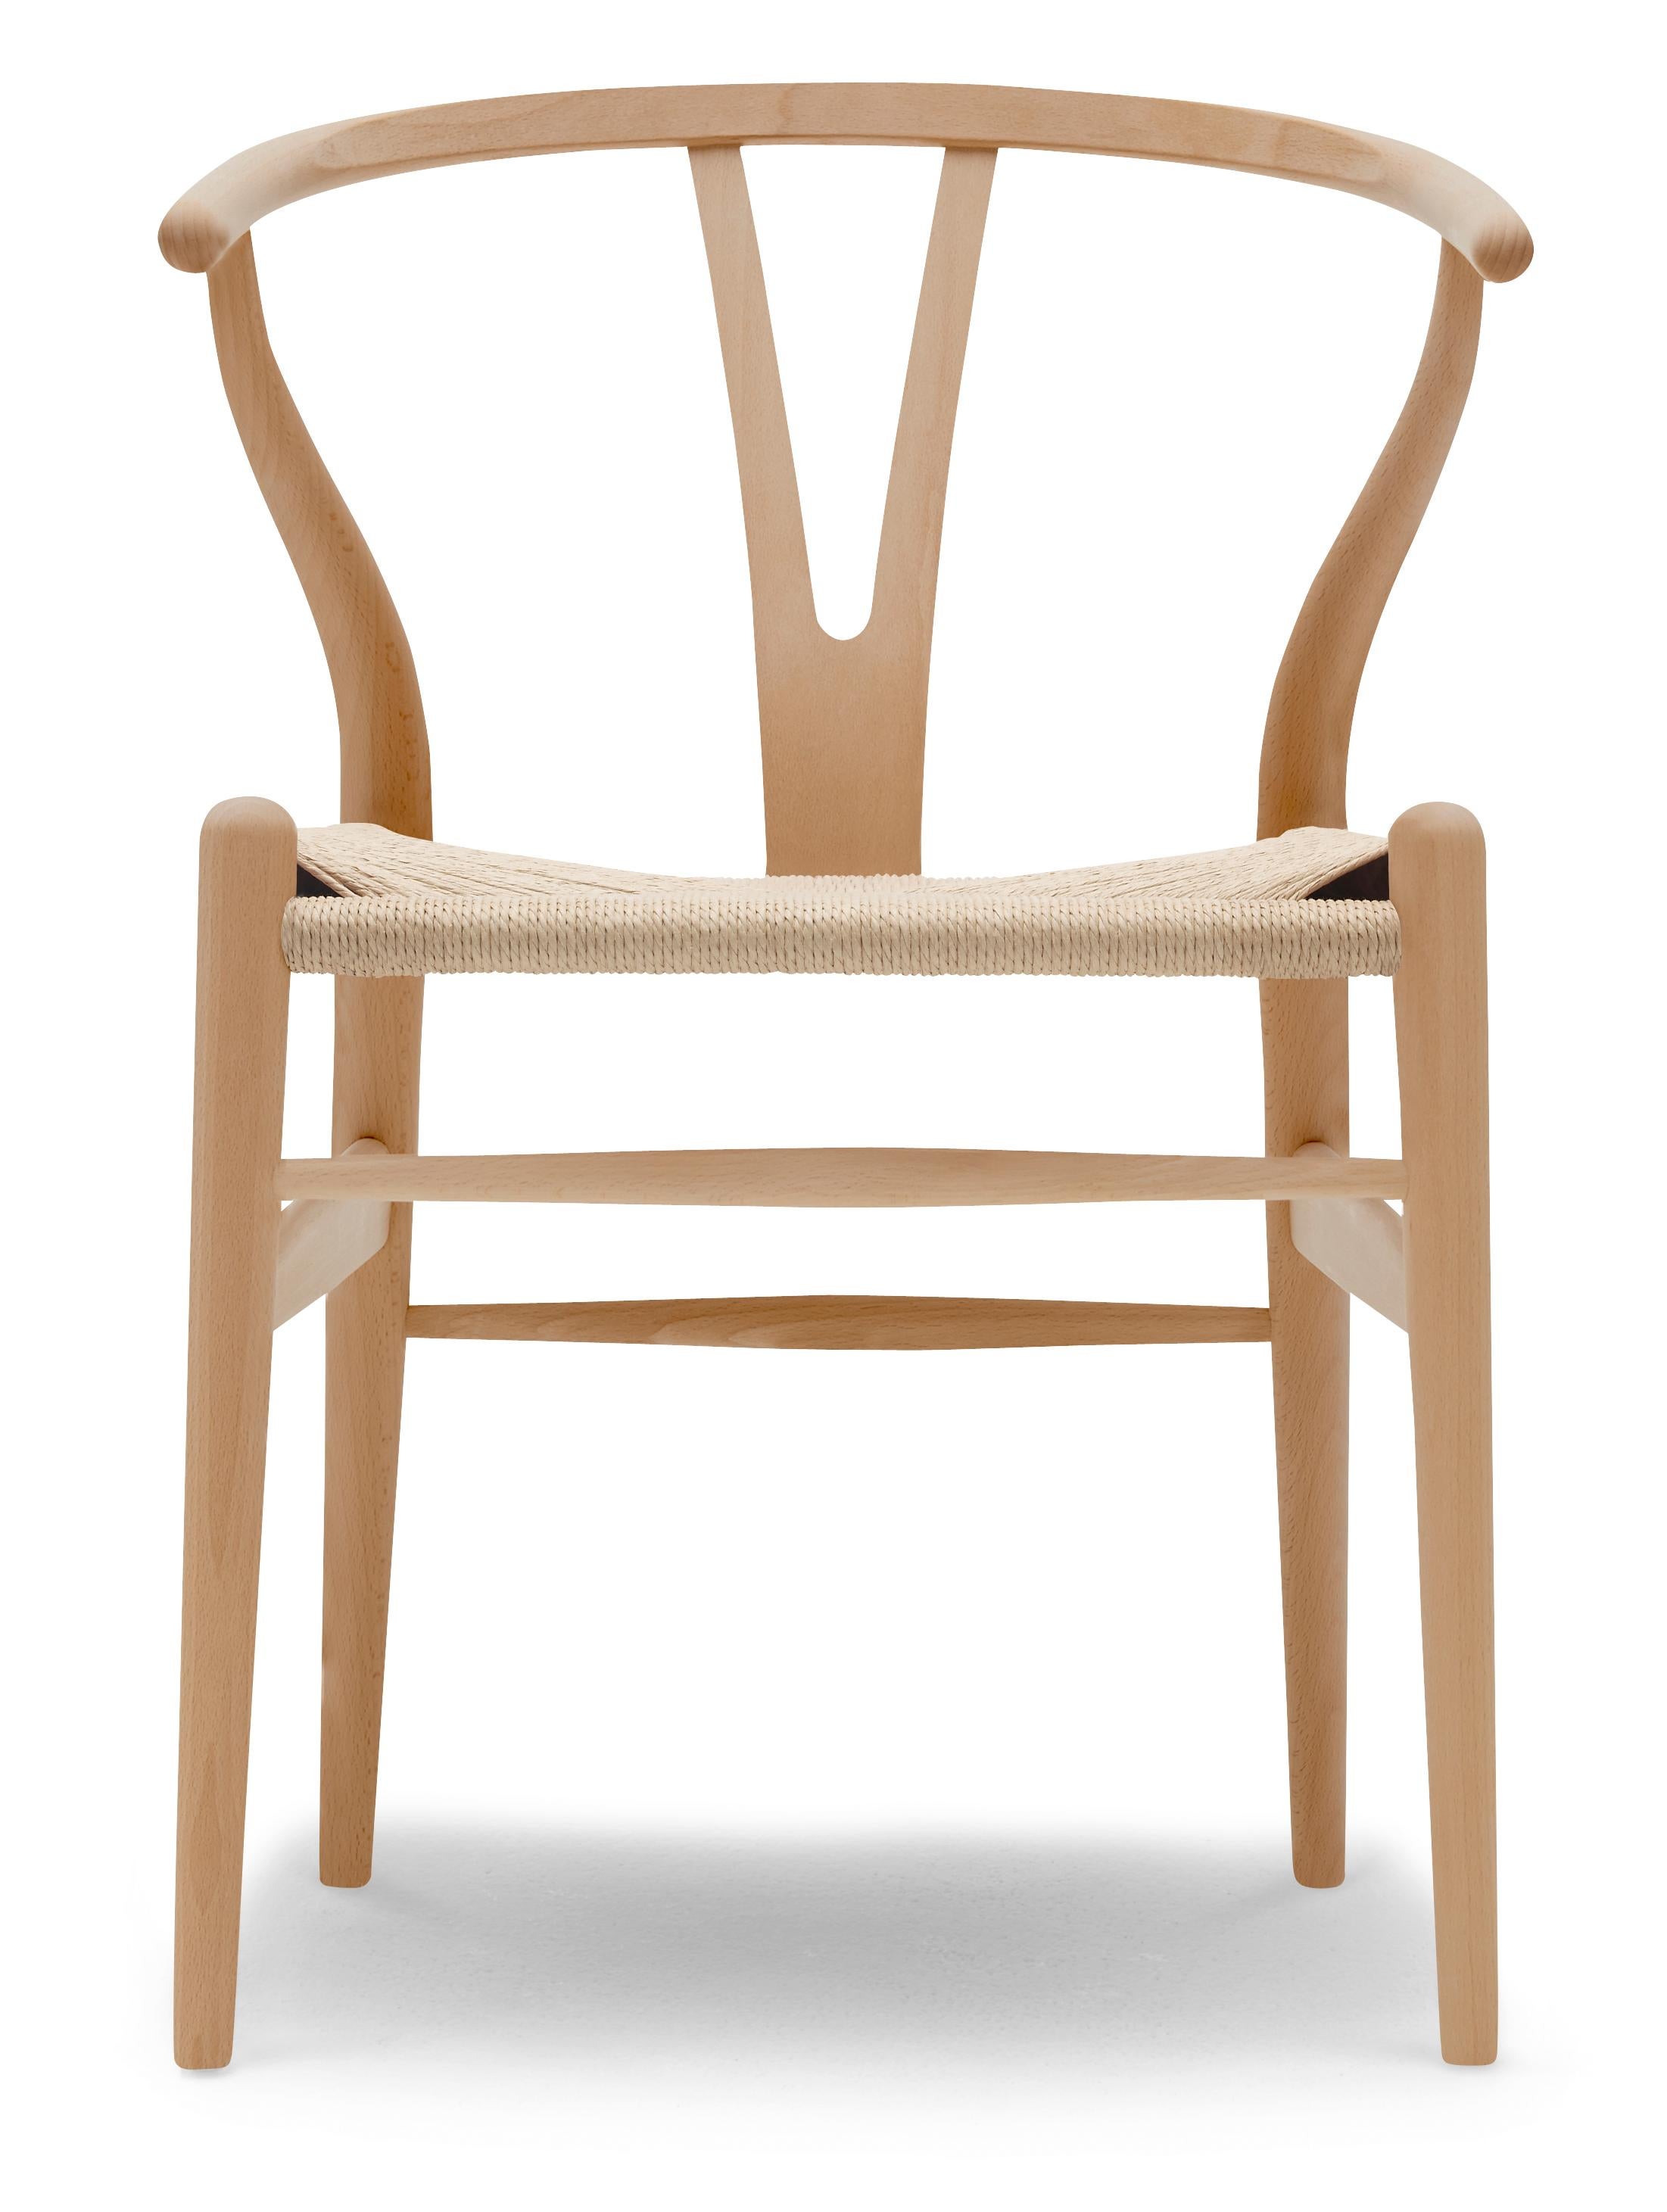 Brown (Beech Lacquer) CH24 Wishbone Chair in Wood Finishes with Natural Papercord Seat by Hans Wegner